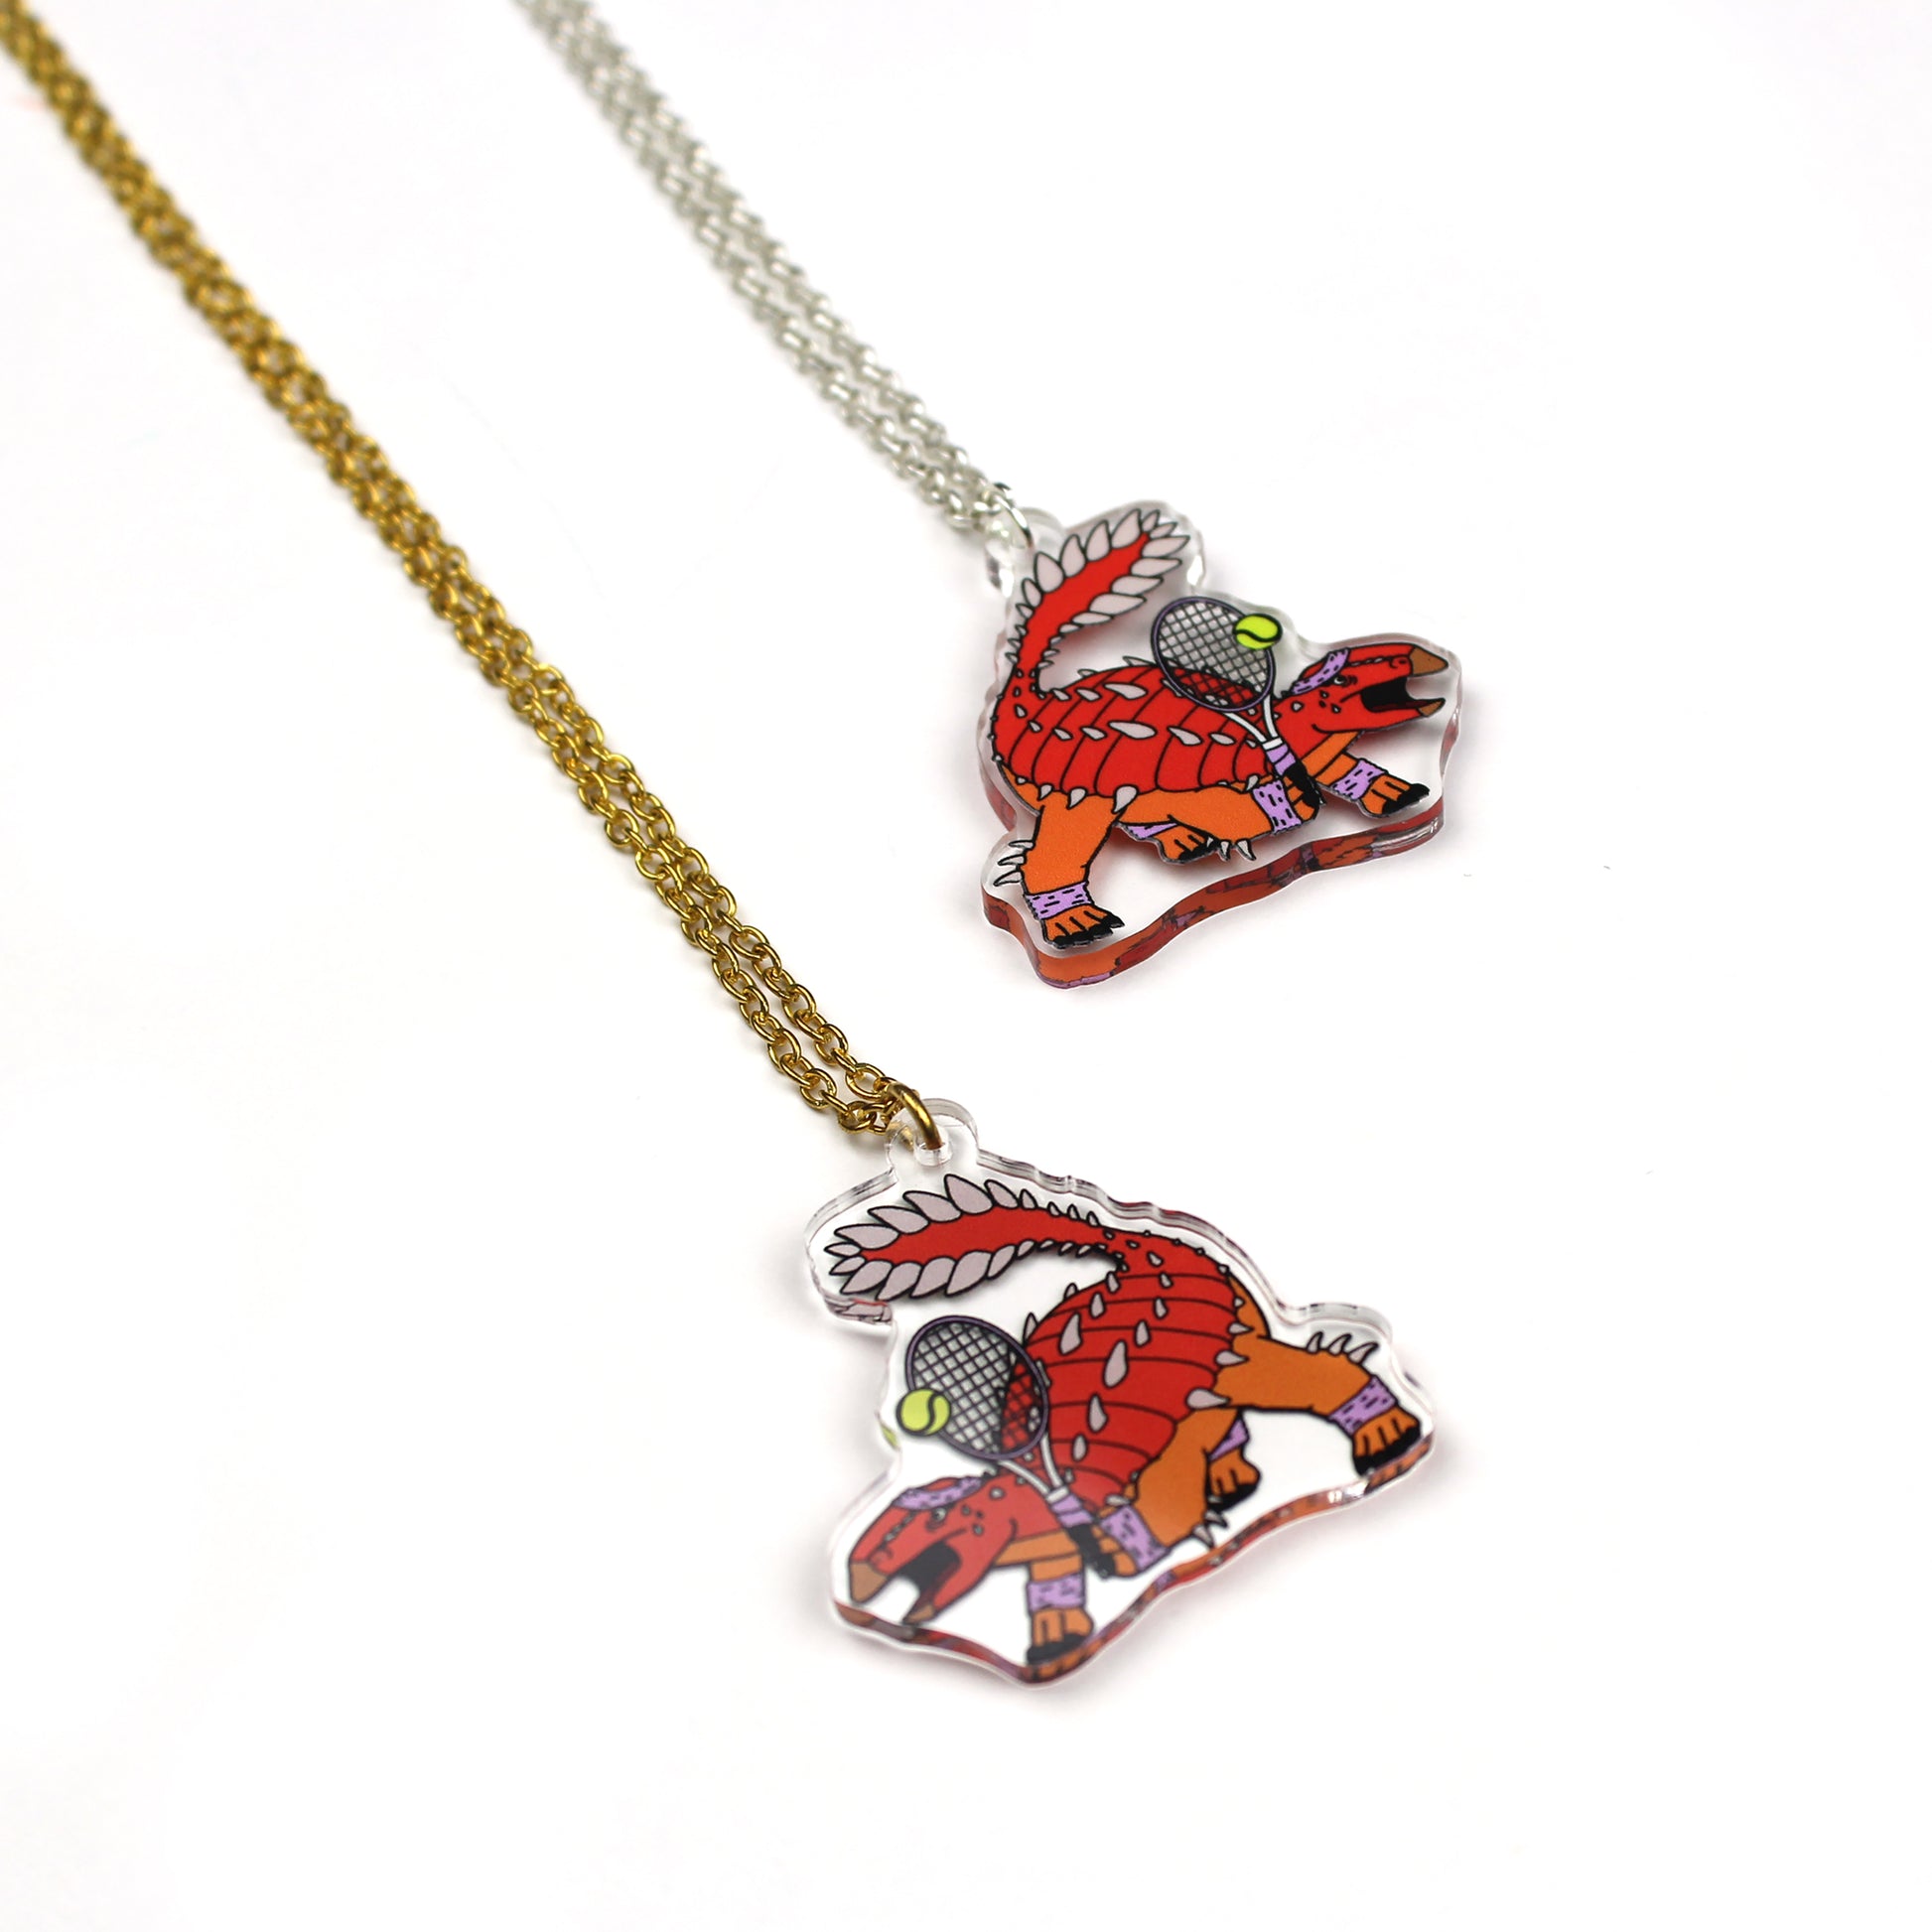 Tennis Dinosaur Necklace with gold and silver tone chain